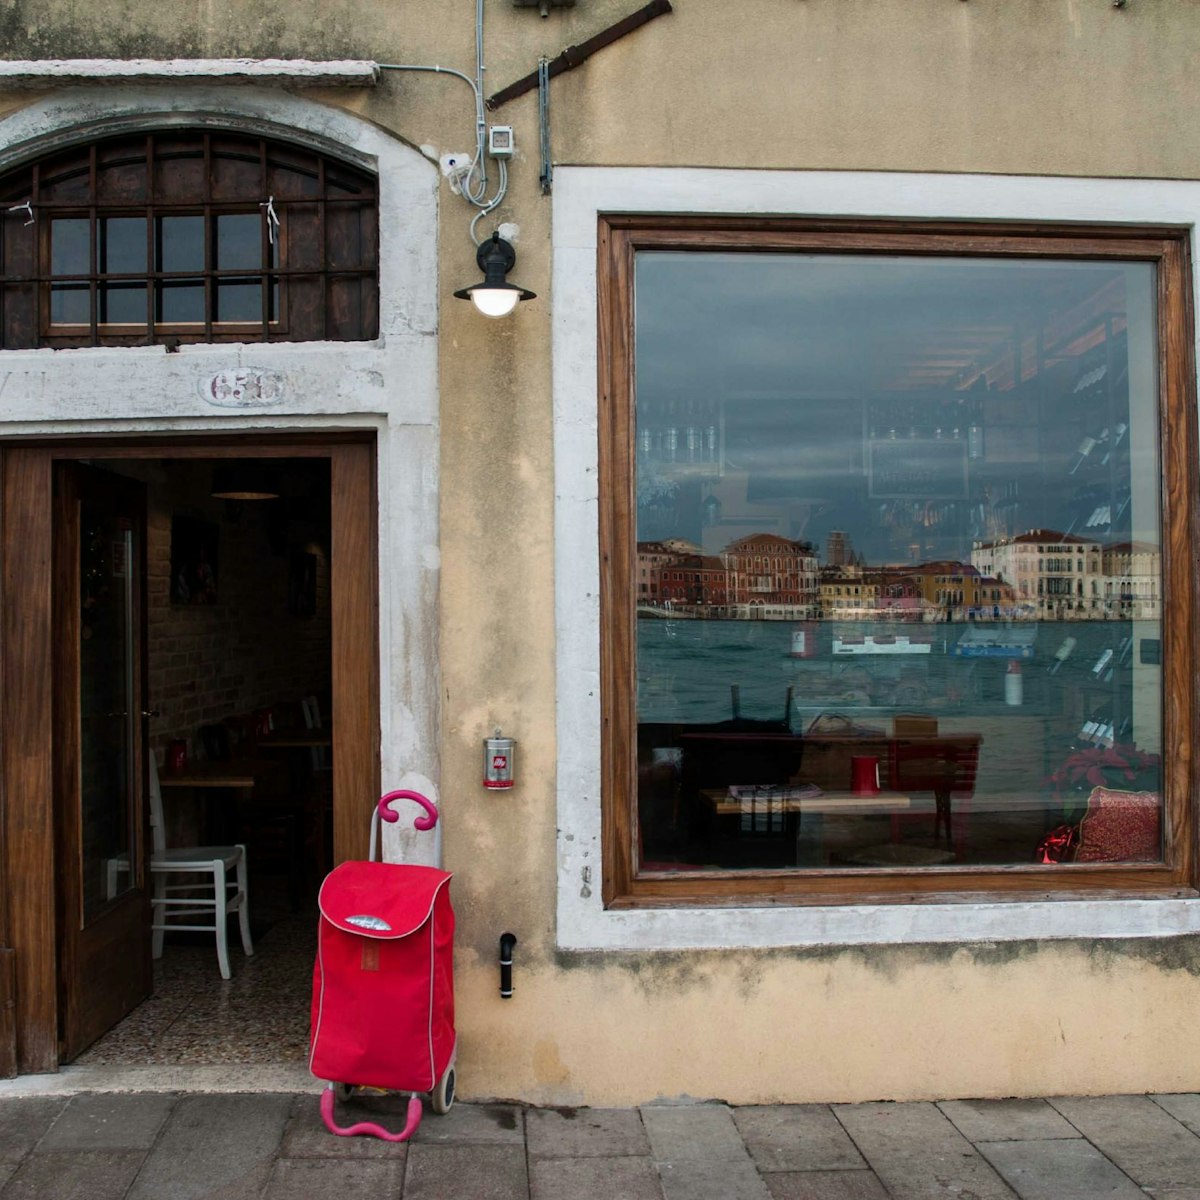 The  entrance to Osteria da Moro with the Zattere reflected in its window